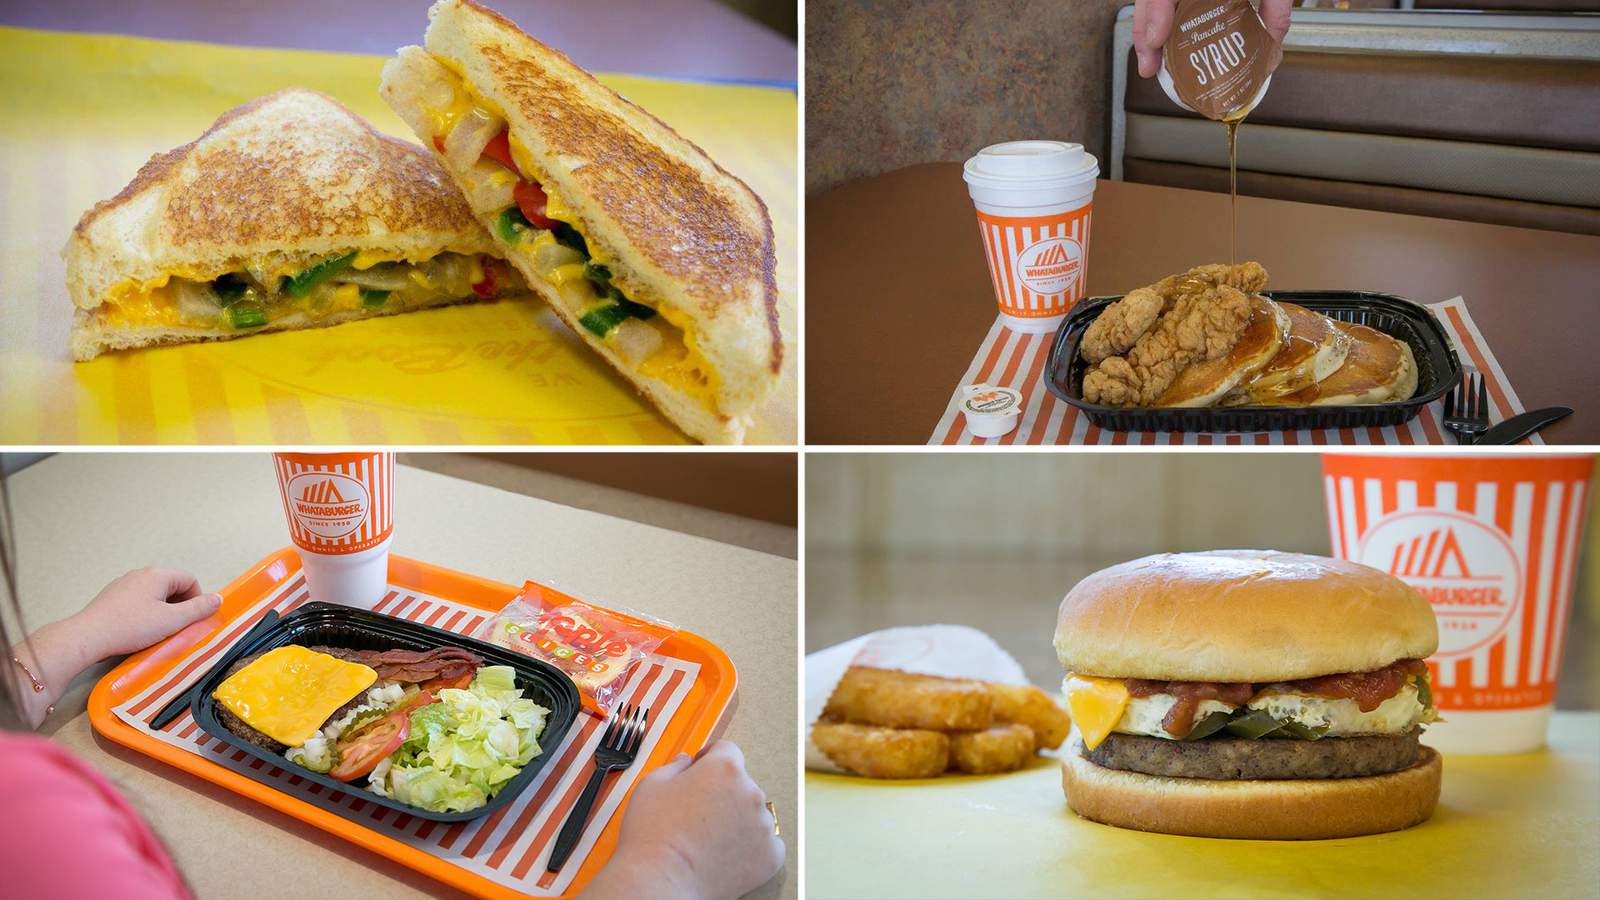 Yes, Whataburger has a secret menu. Here’s what’s on it